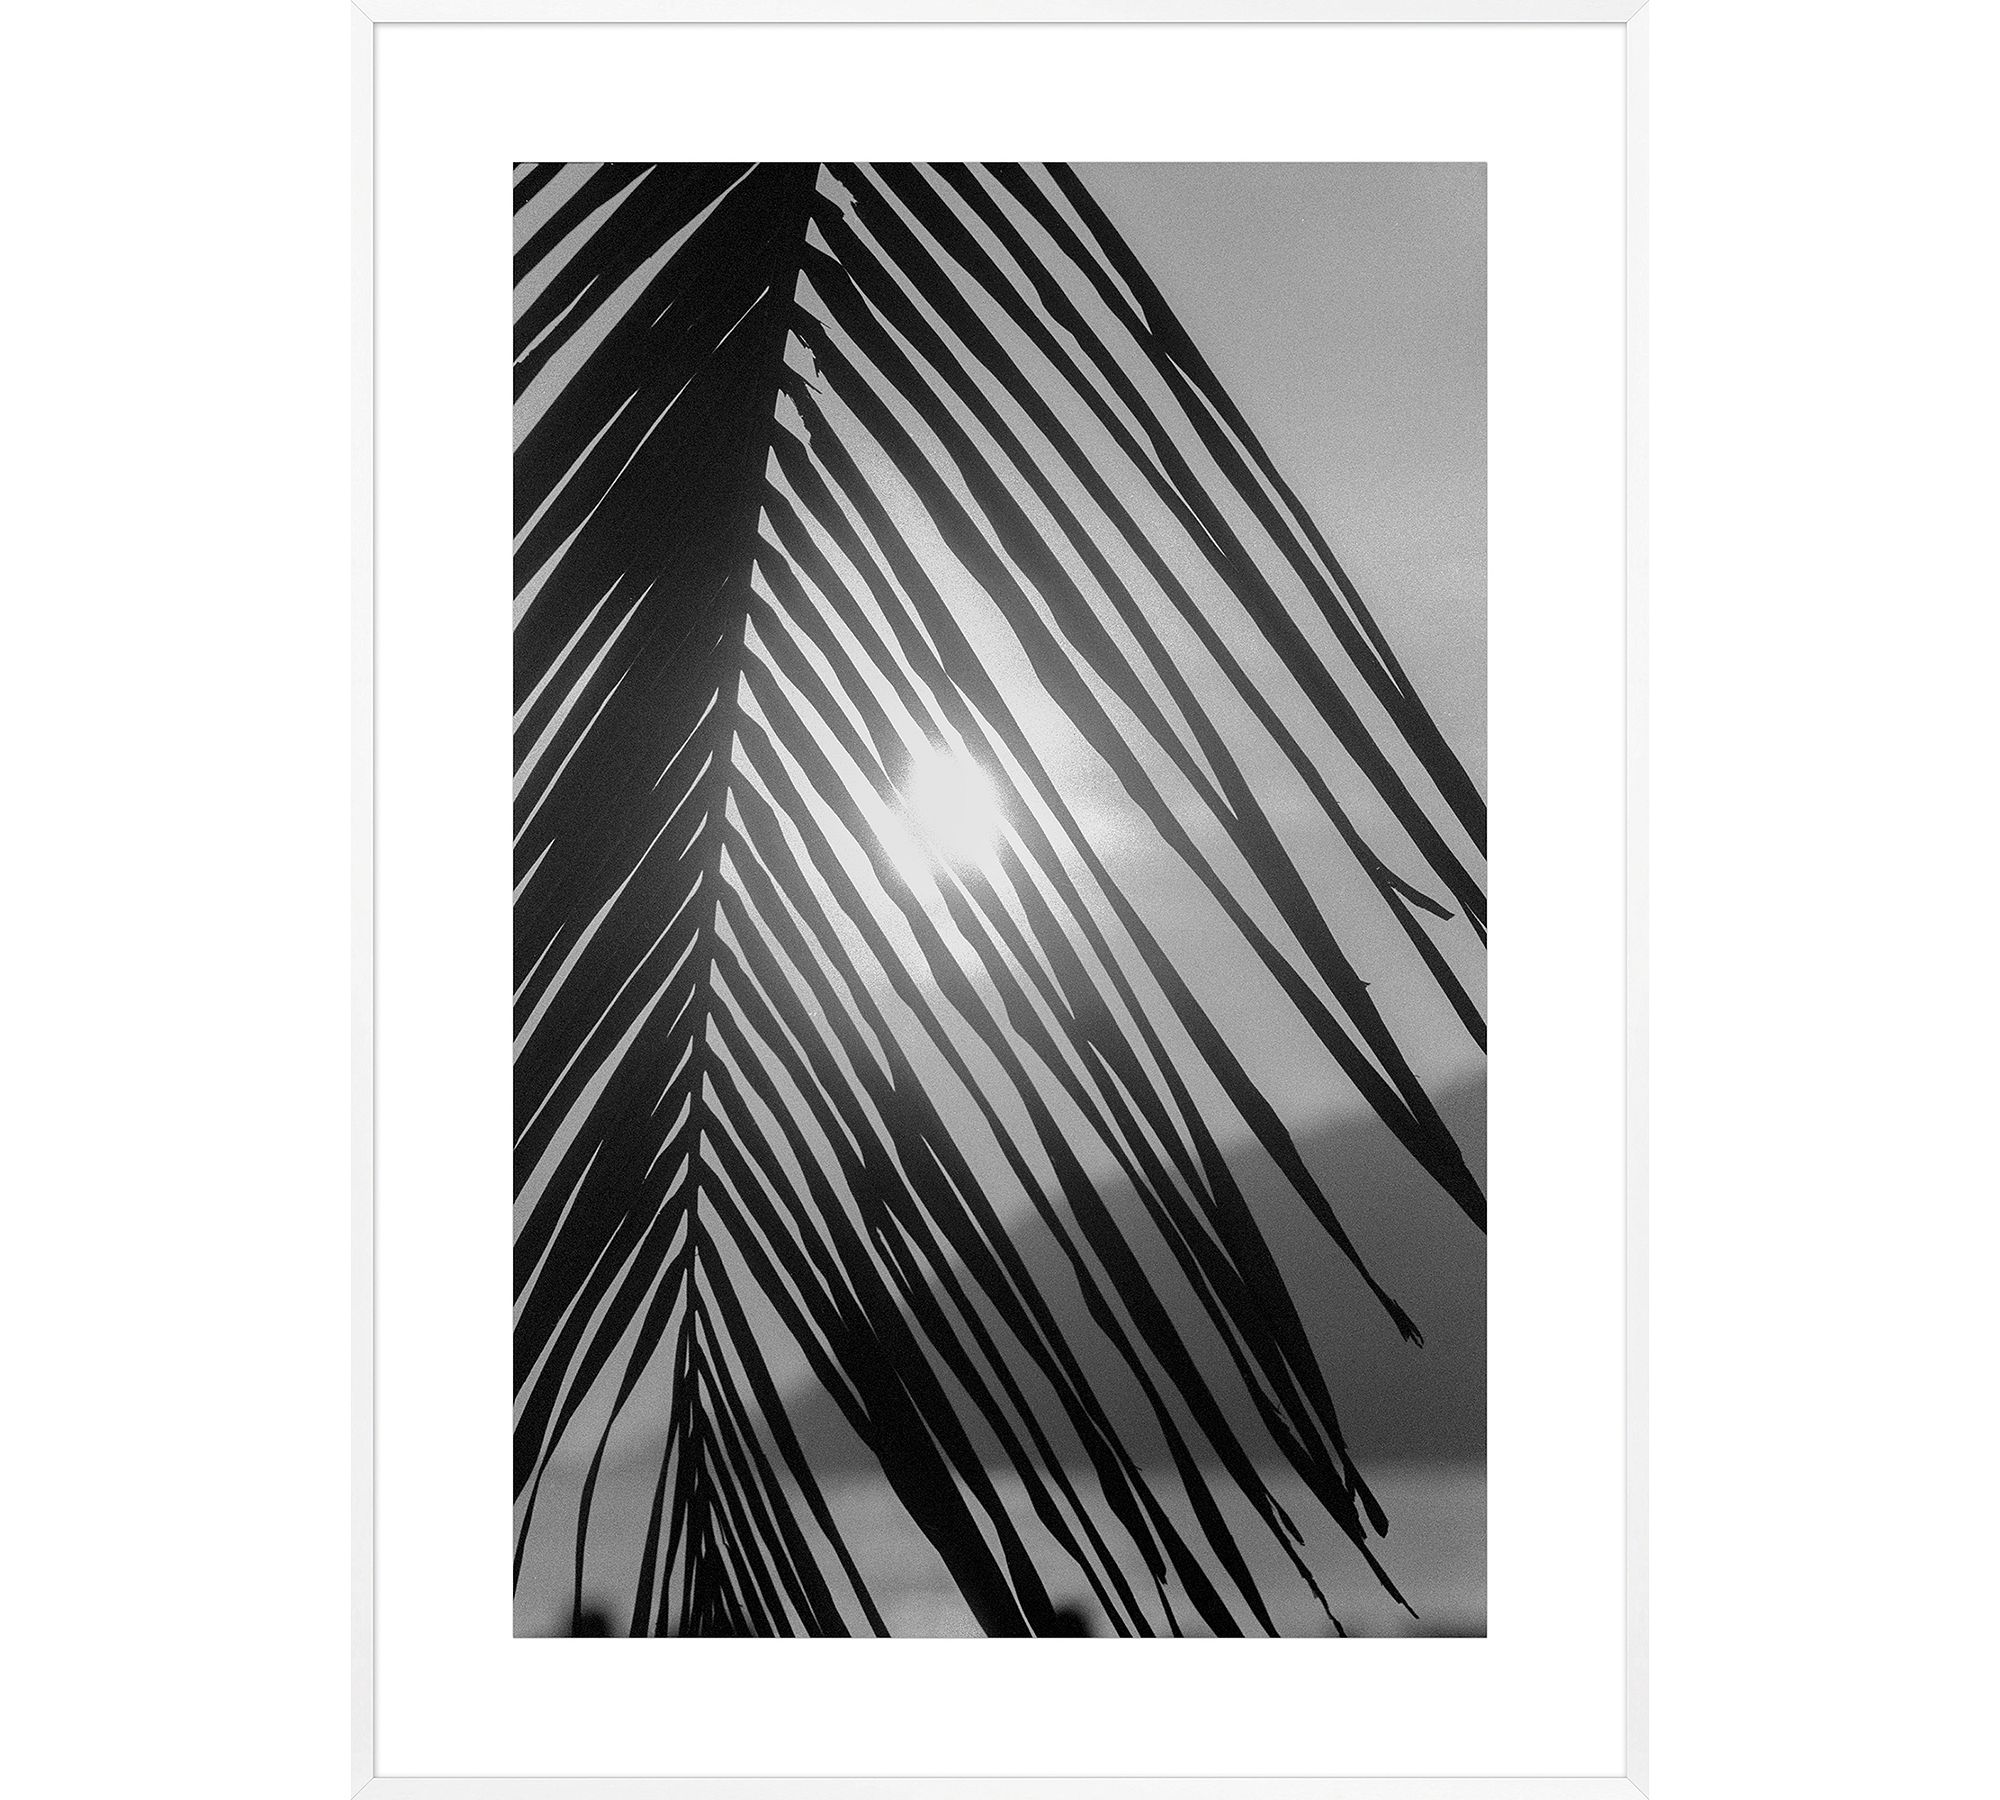 Palm Sun by Leco Moura